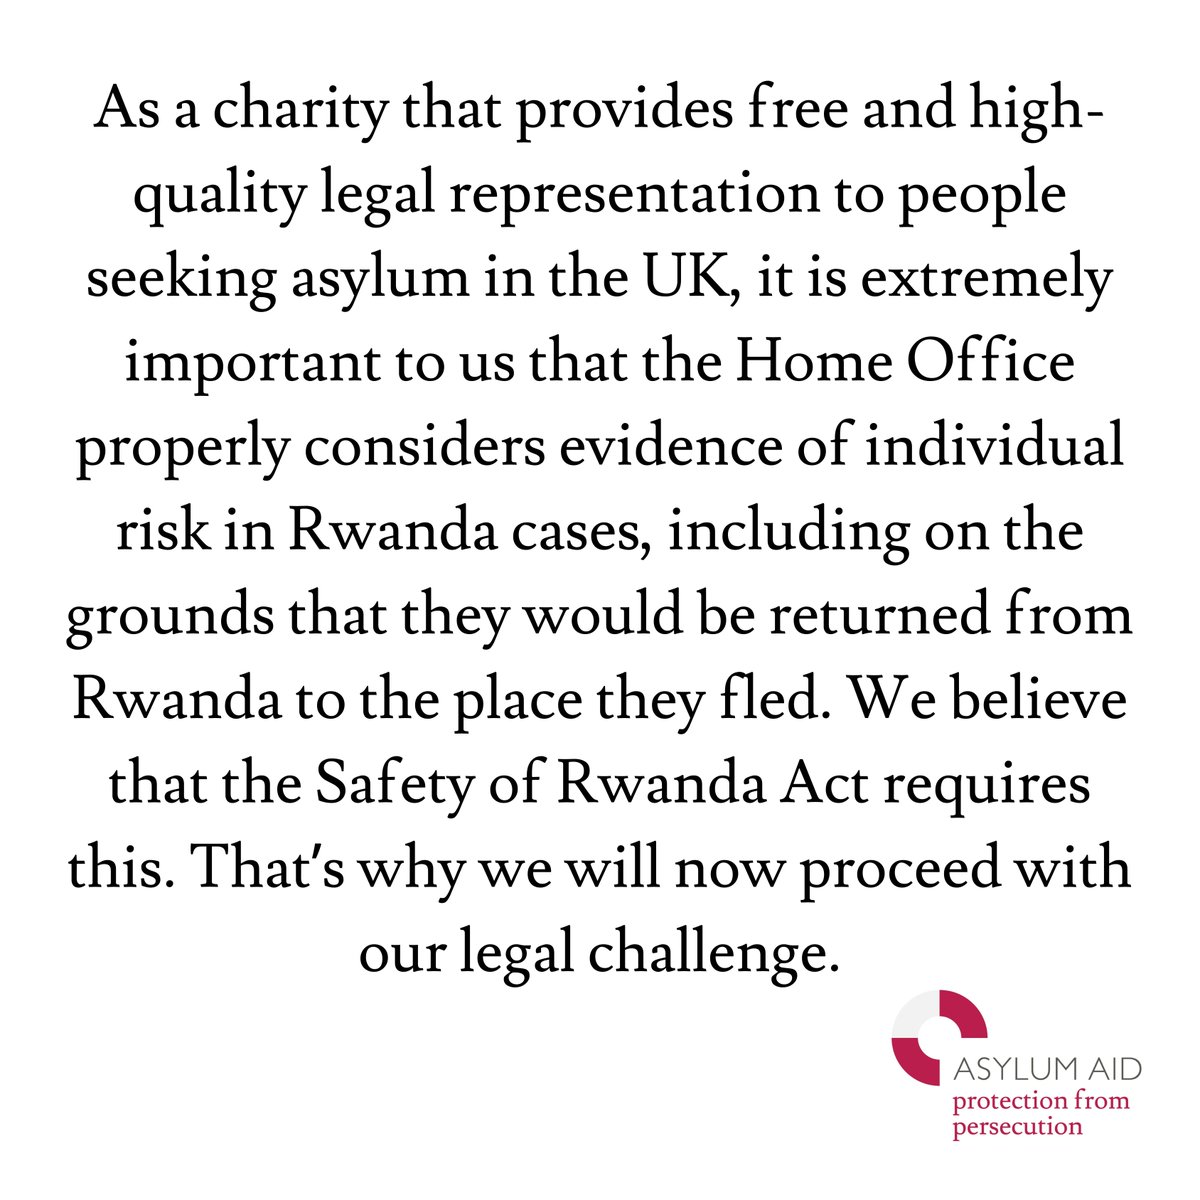 🚨BREAKING: In a win for us, Home Office has agreed to amend parts of its Safety of Rwanda guidance, as a result of our legal action. BUT they have disagreed with our other challenge to the policy, so we are going to court. 1/2 Read more here: asylumaid.org.uk/node/157